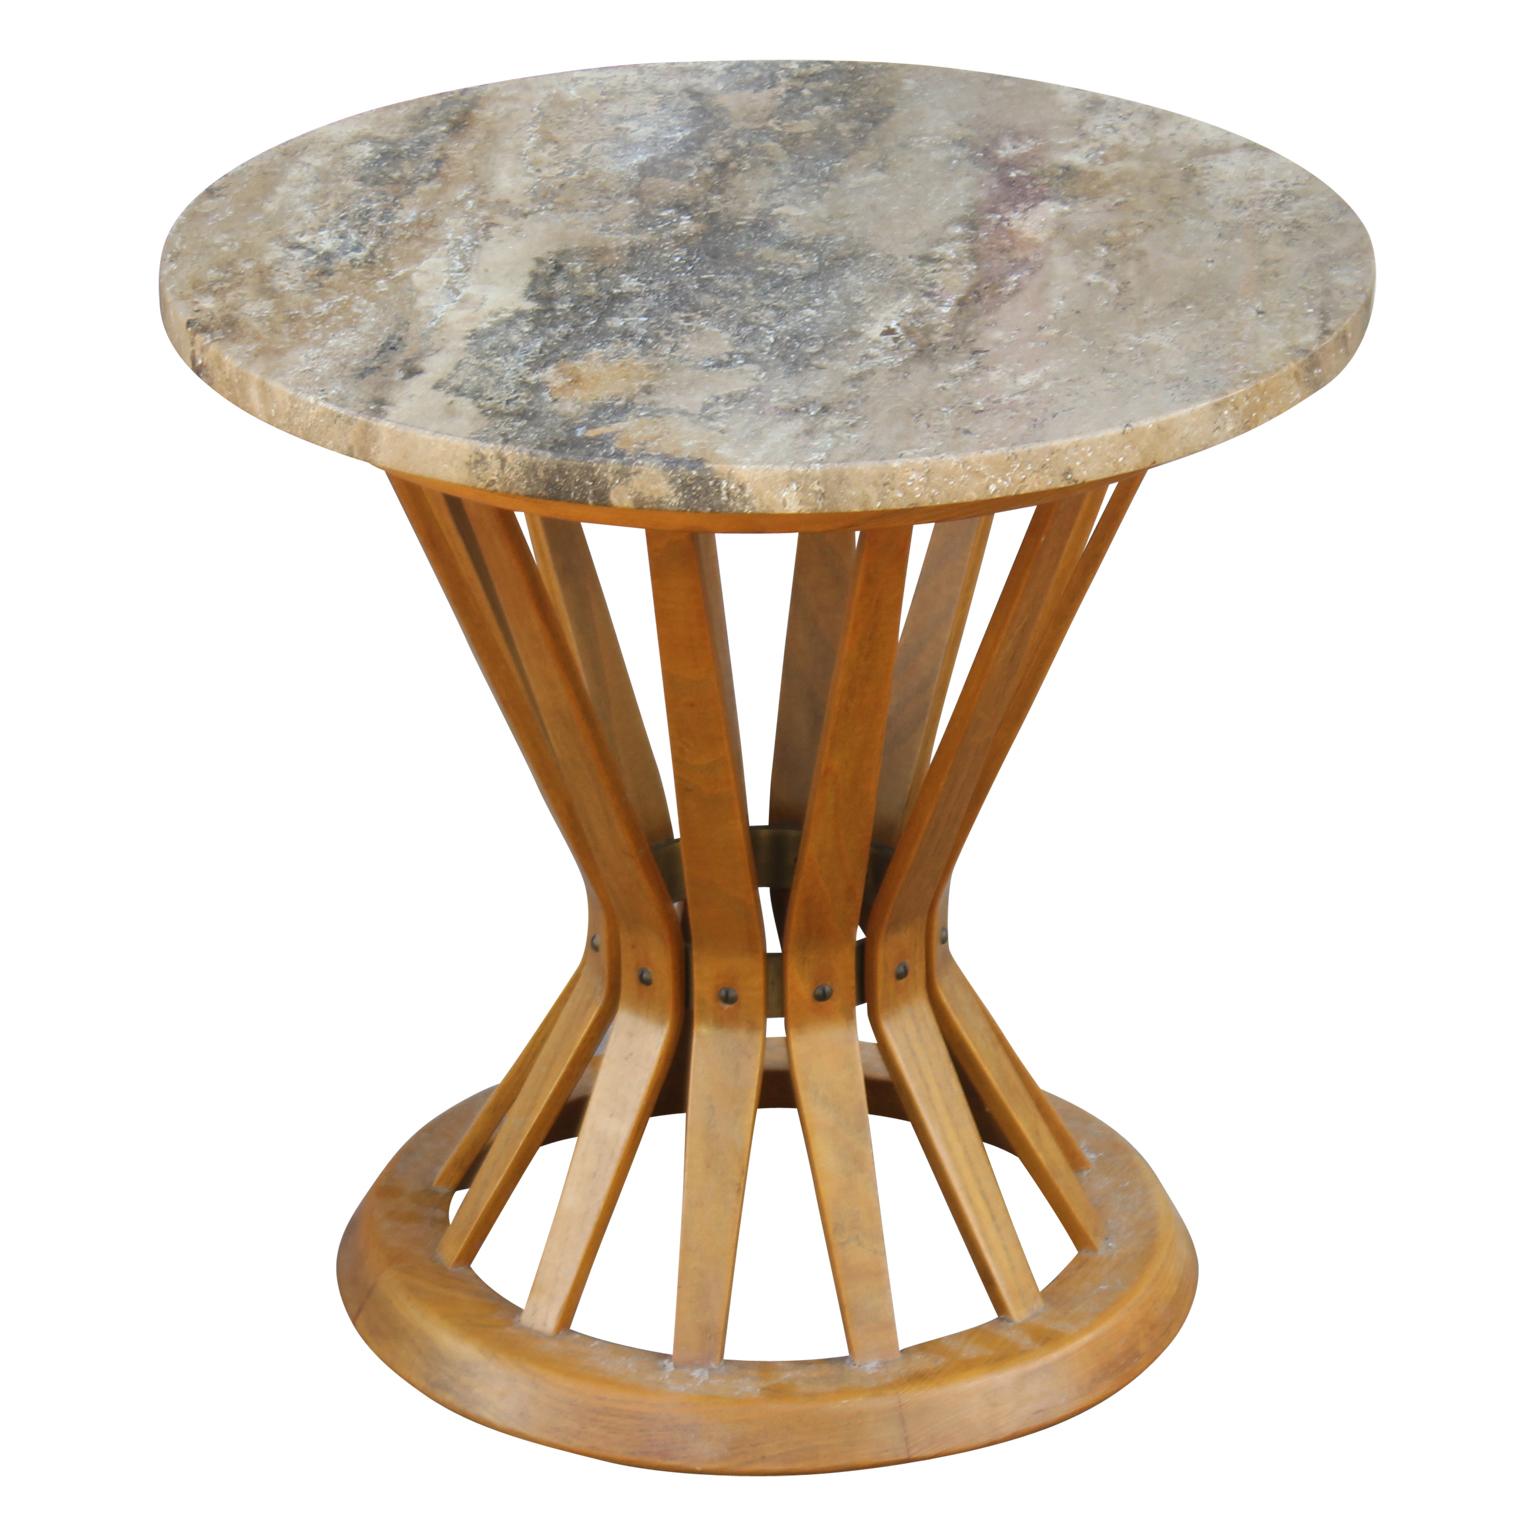 Modern Edward Wormley for Dunbar Round Marble Top Sheaf of Wheat Side Table